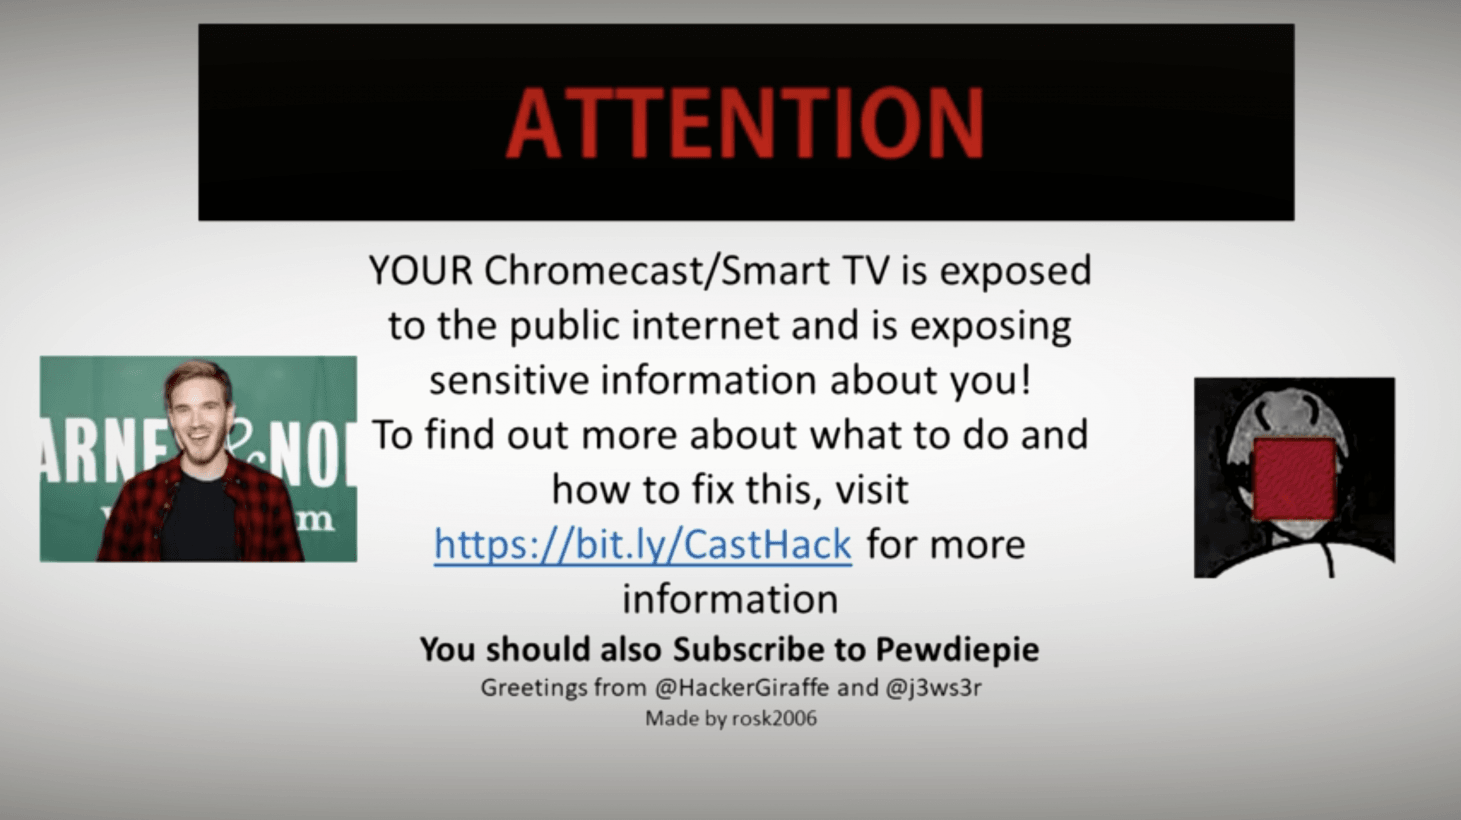 The hackers exploited a UPnP bug in routers to display this message on Chromecast-equipped screens